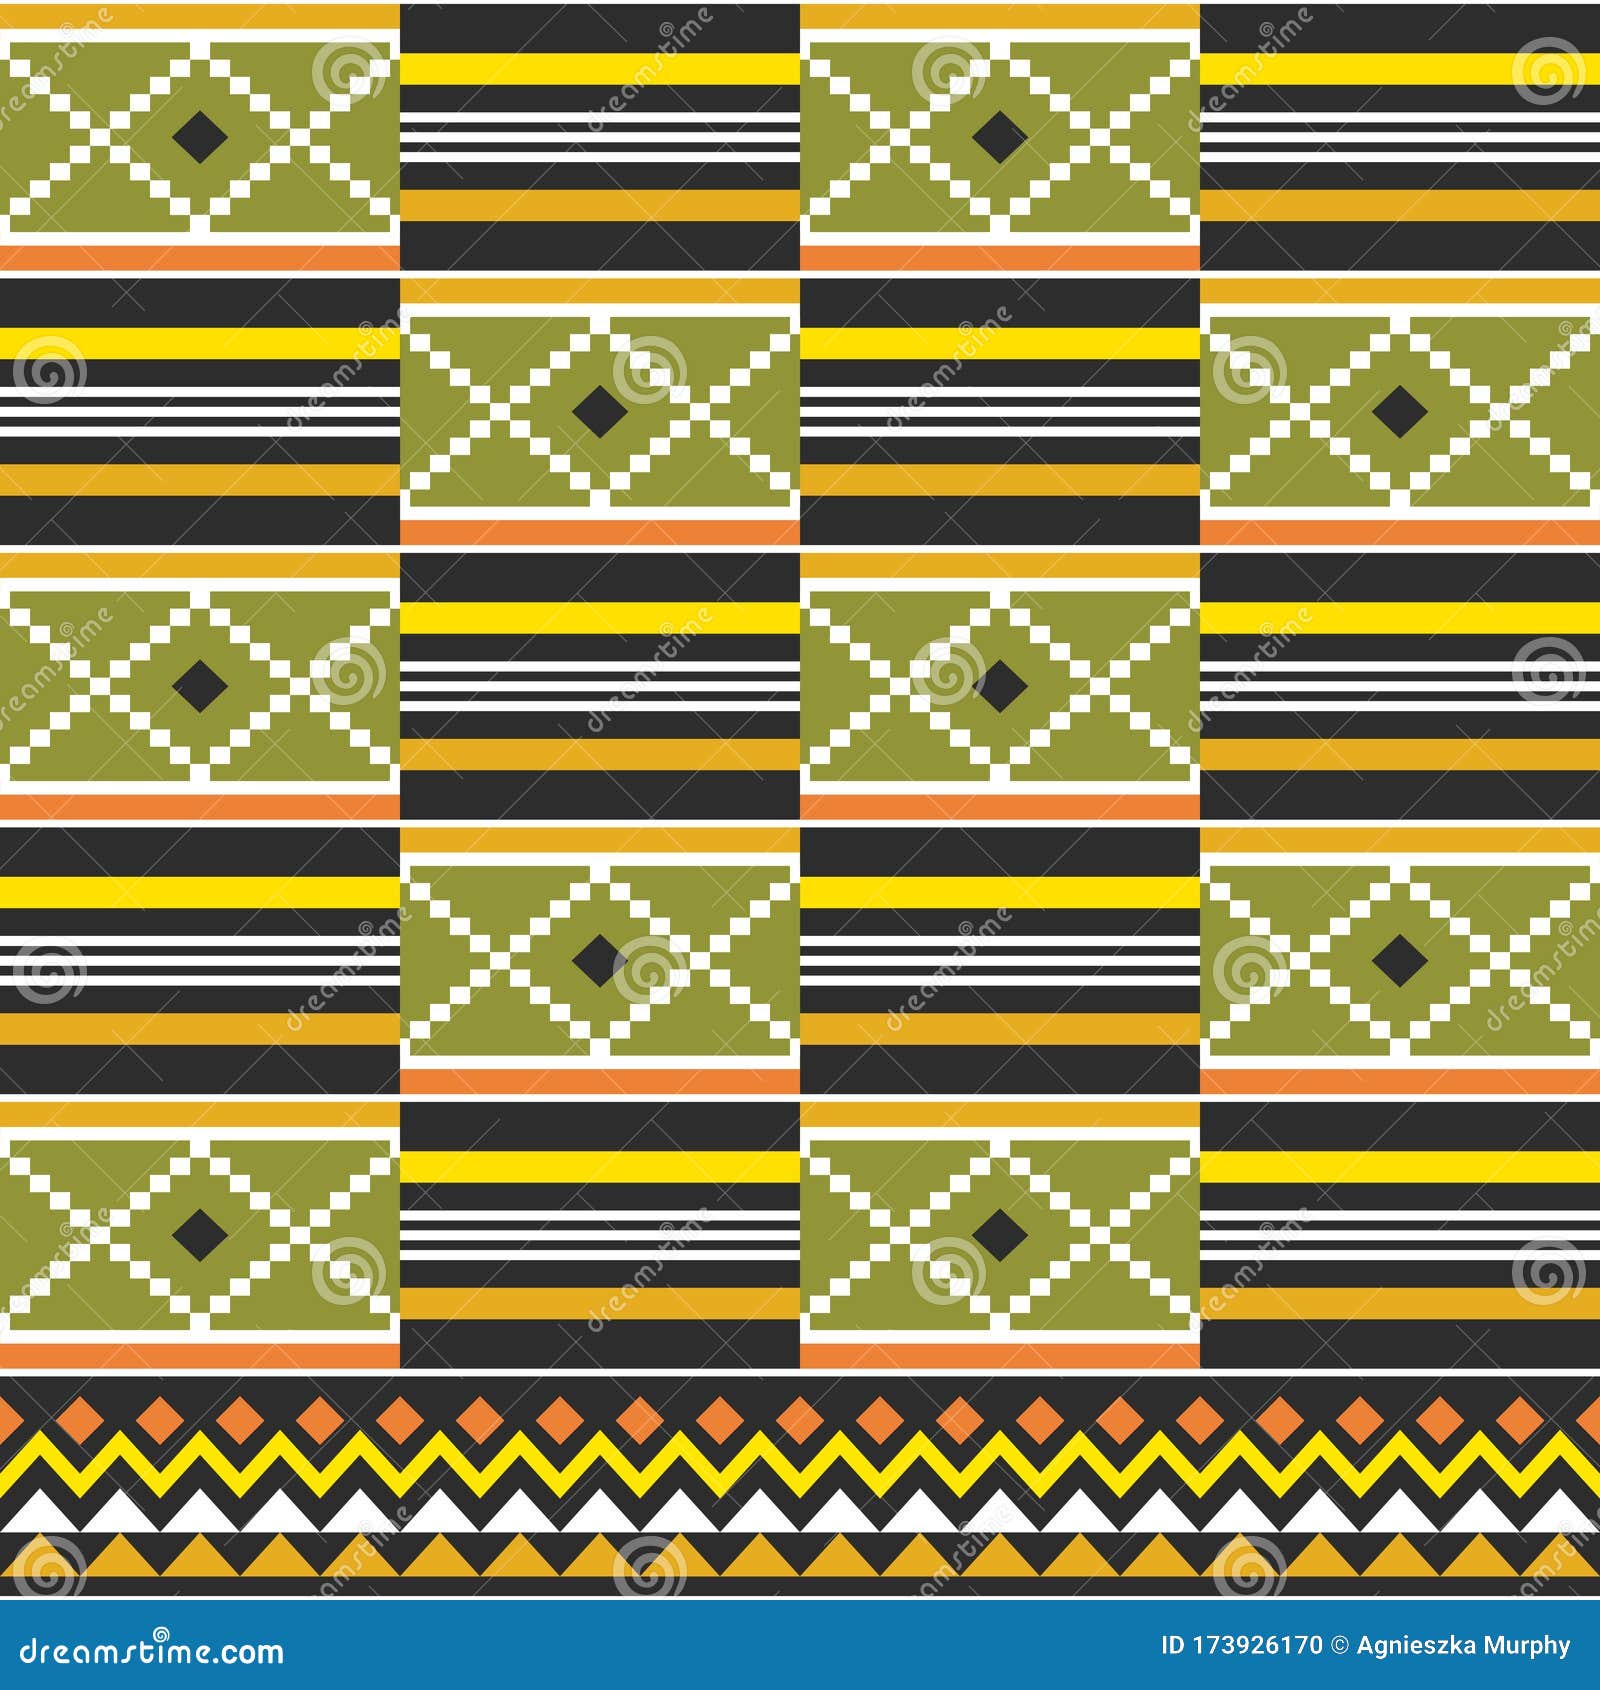 African kente cloth style seamless pattern Vector Image